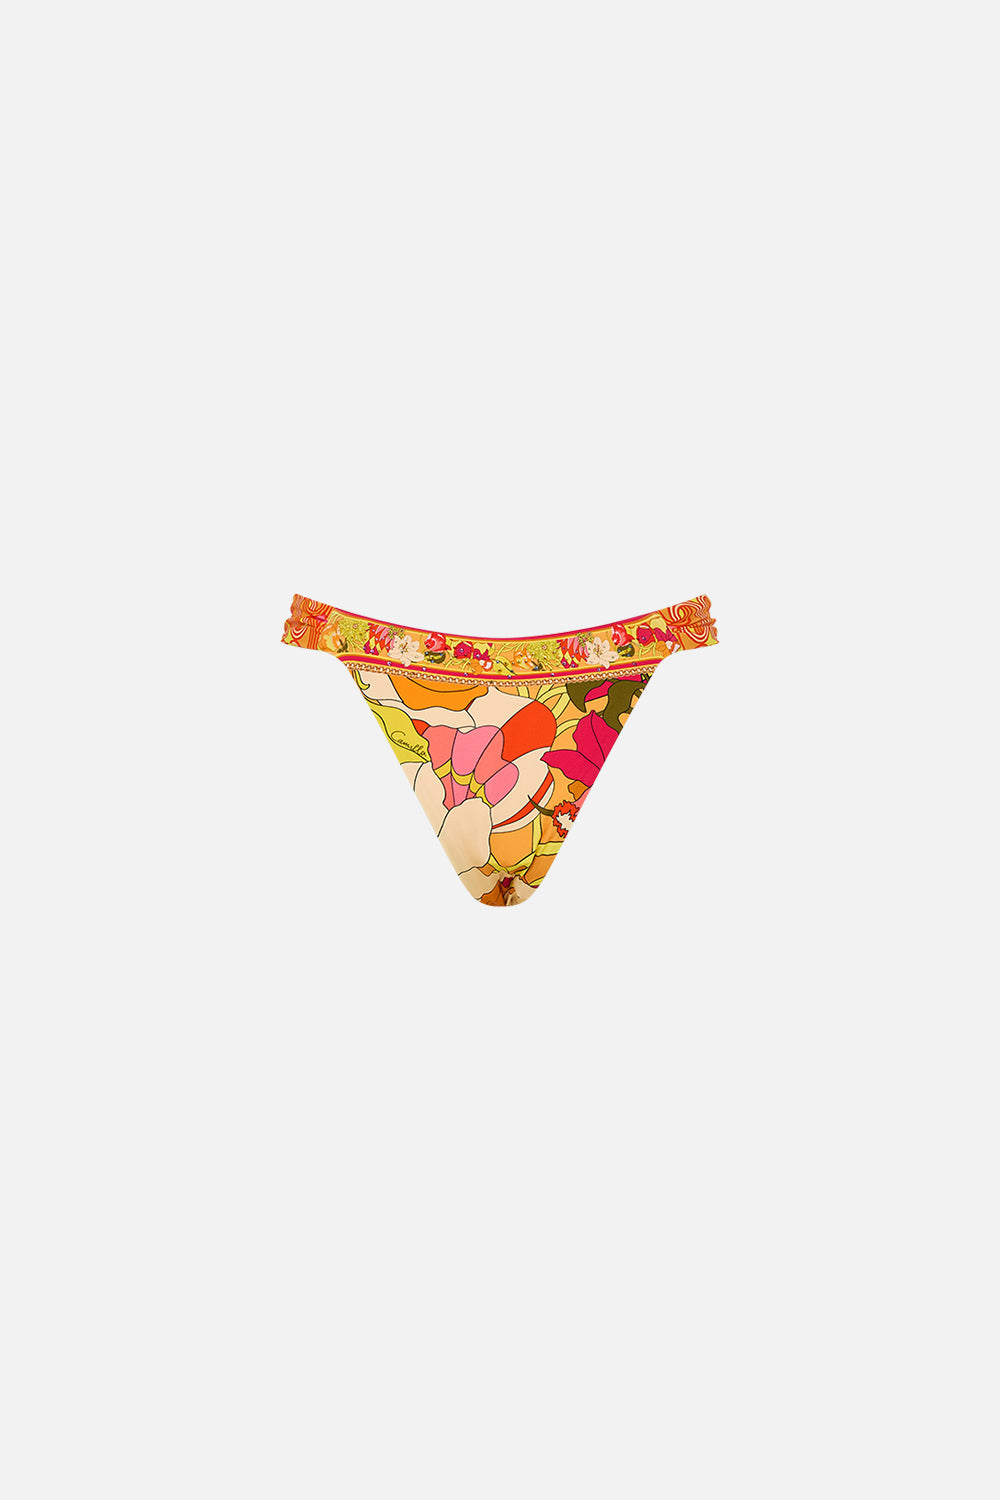 CAMILLA floral ring pant in The Flower Child Society